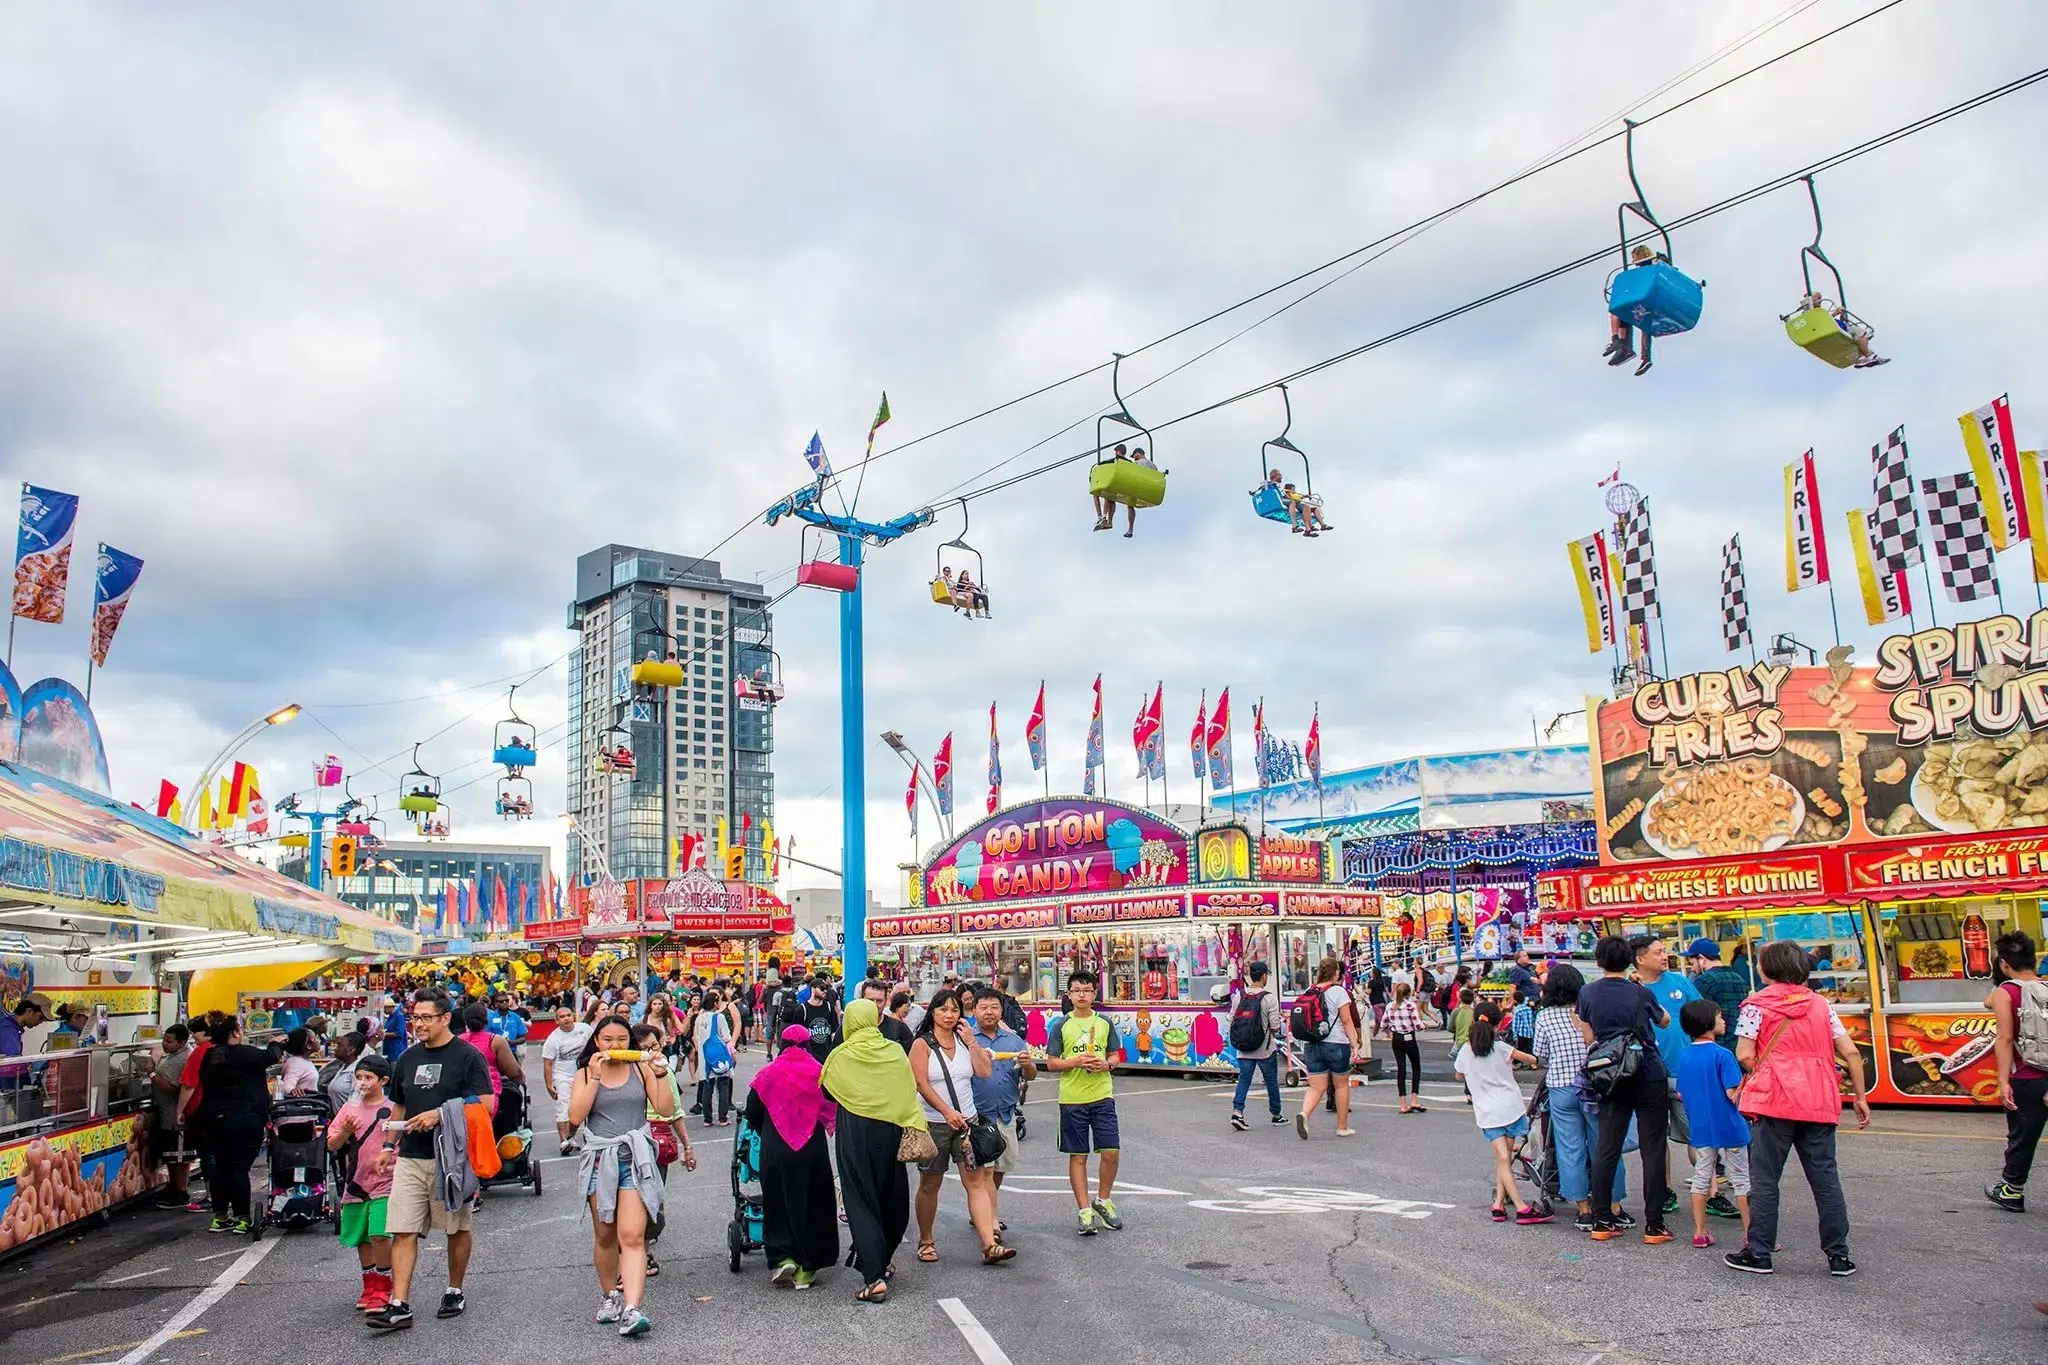 The CNE is back “Virtually Again” for 2021 LITE 92.1 Southern